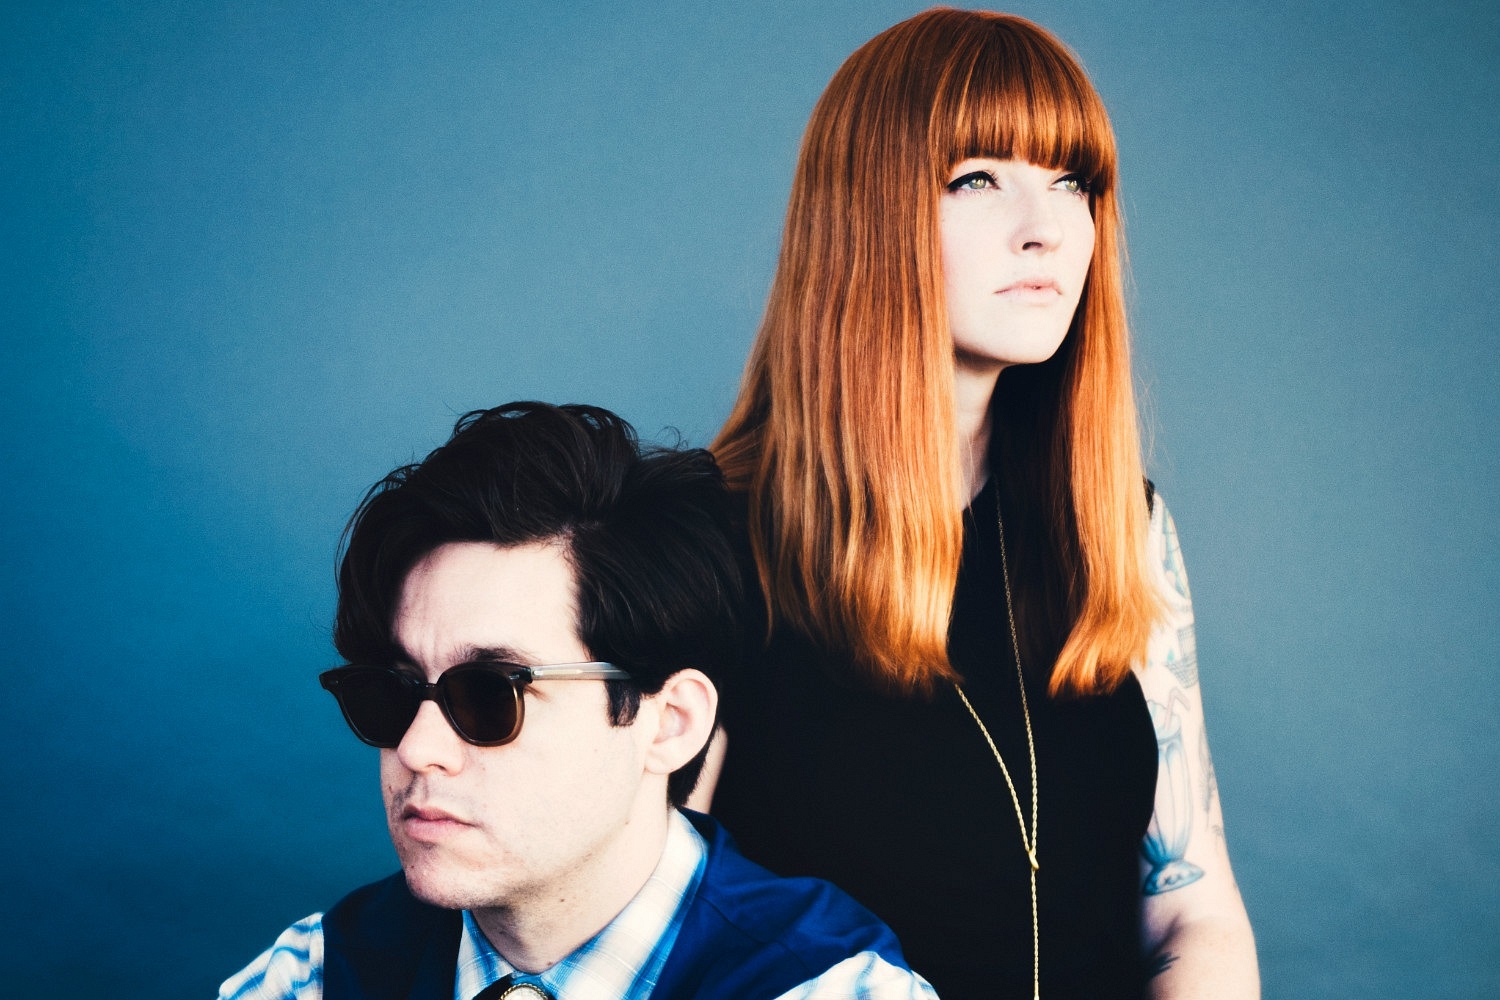 La Sera share breezy new track ‘Queens’ from their upcoming EP